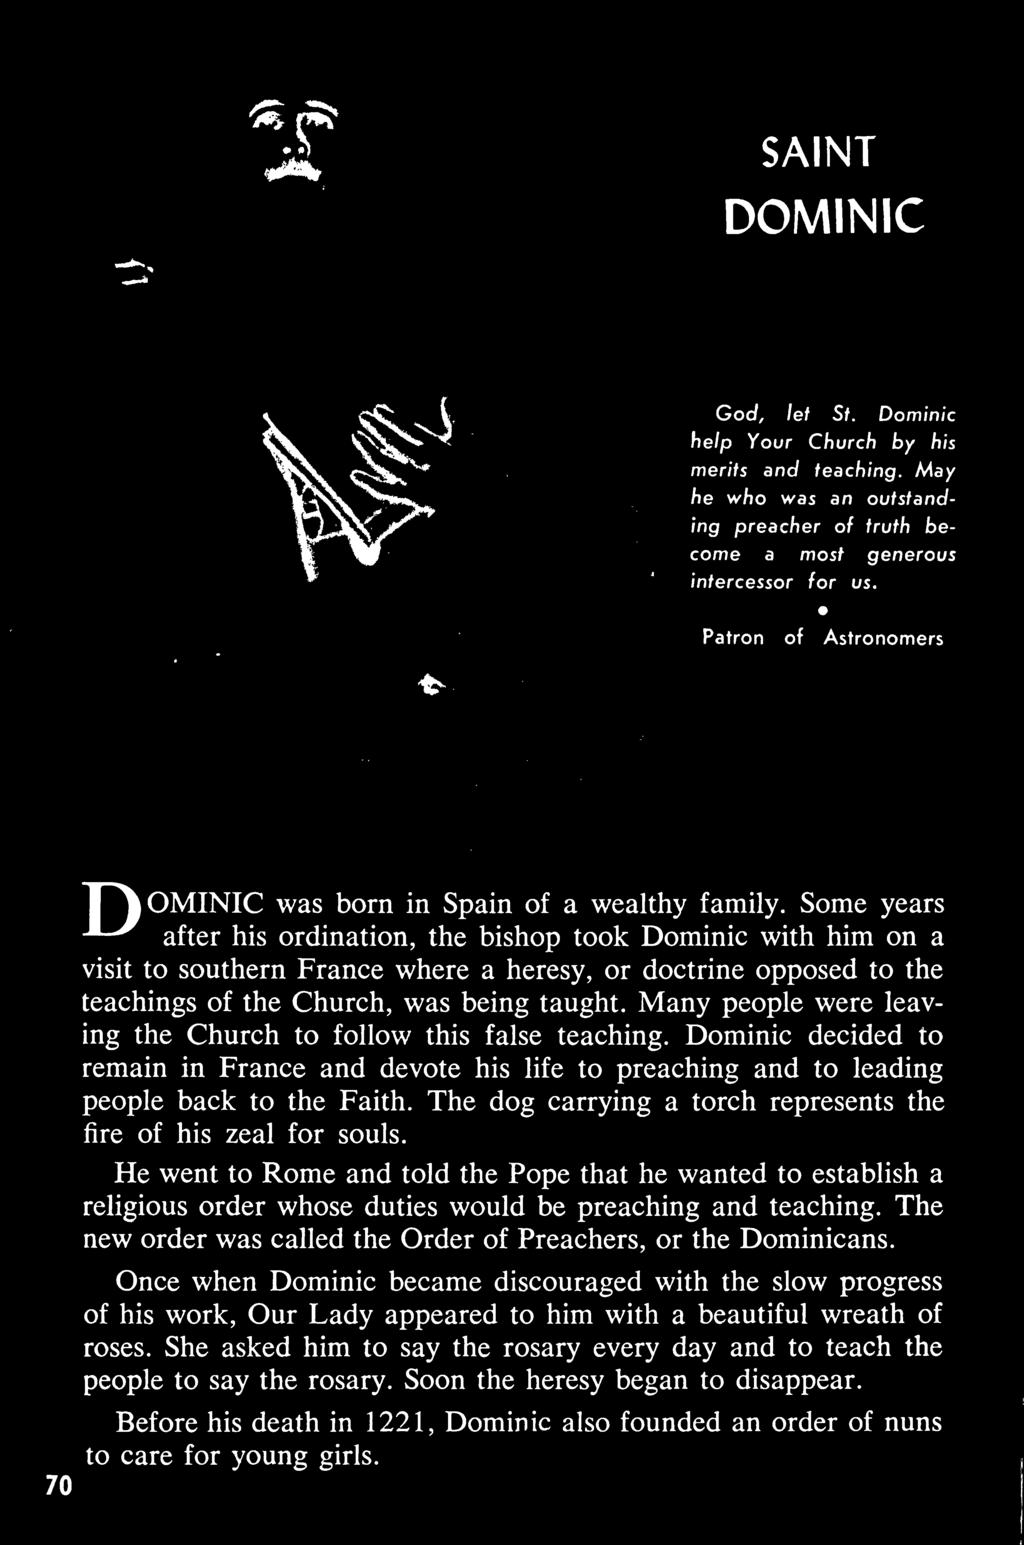 DOMINIC God, let St. Dominic help Your Church by his merits and teaching. May he who was an outstanding preacher of truth become a most generous intercessor for us.